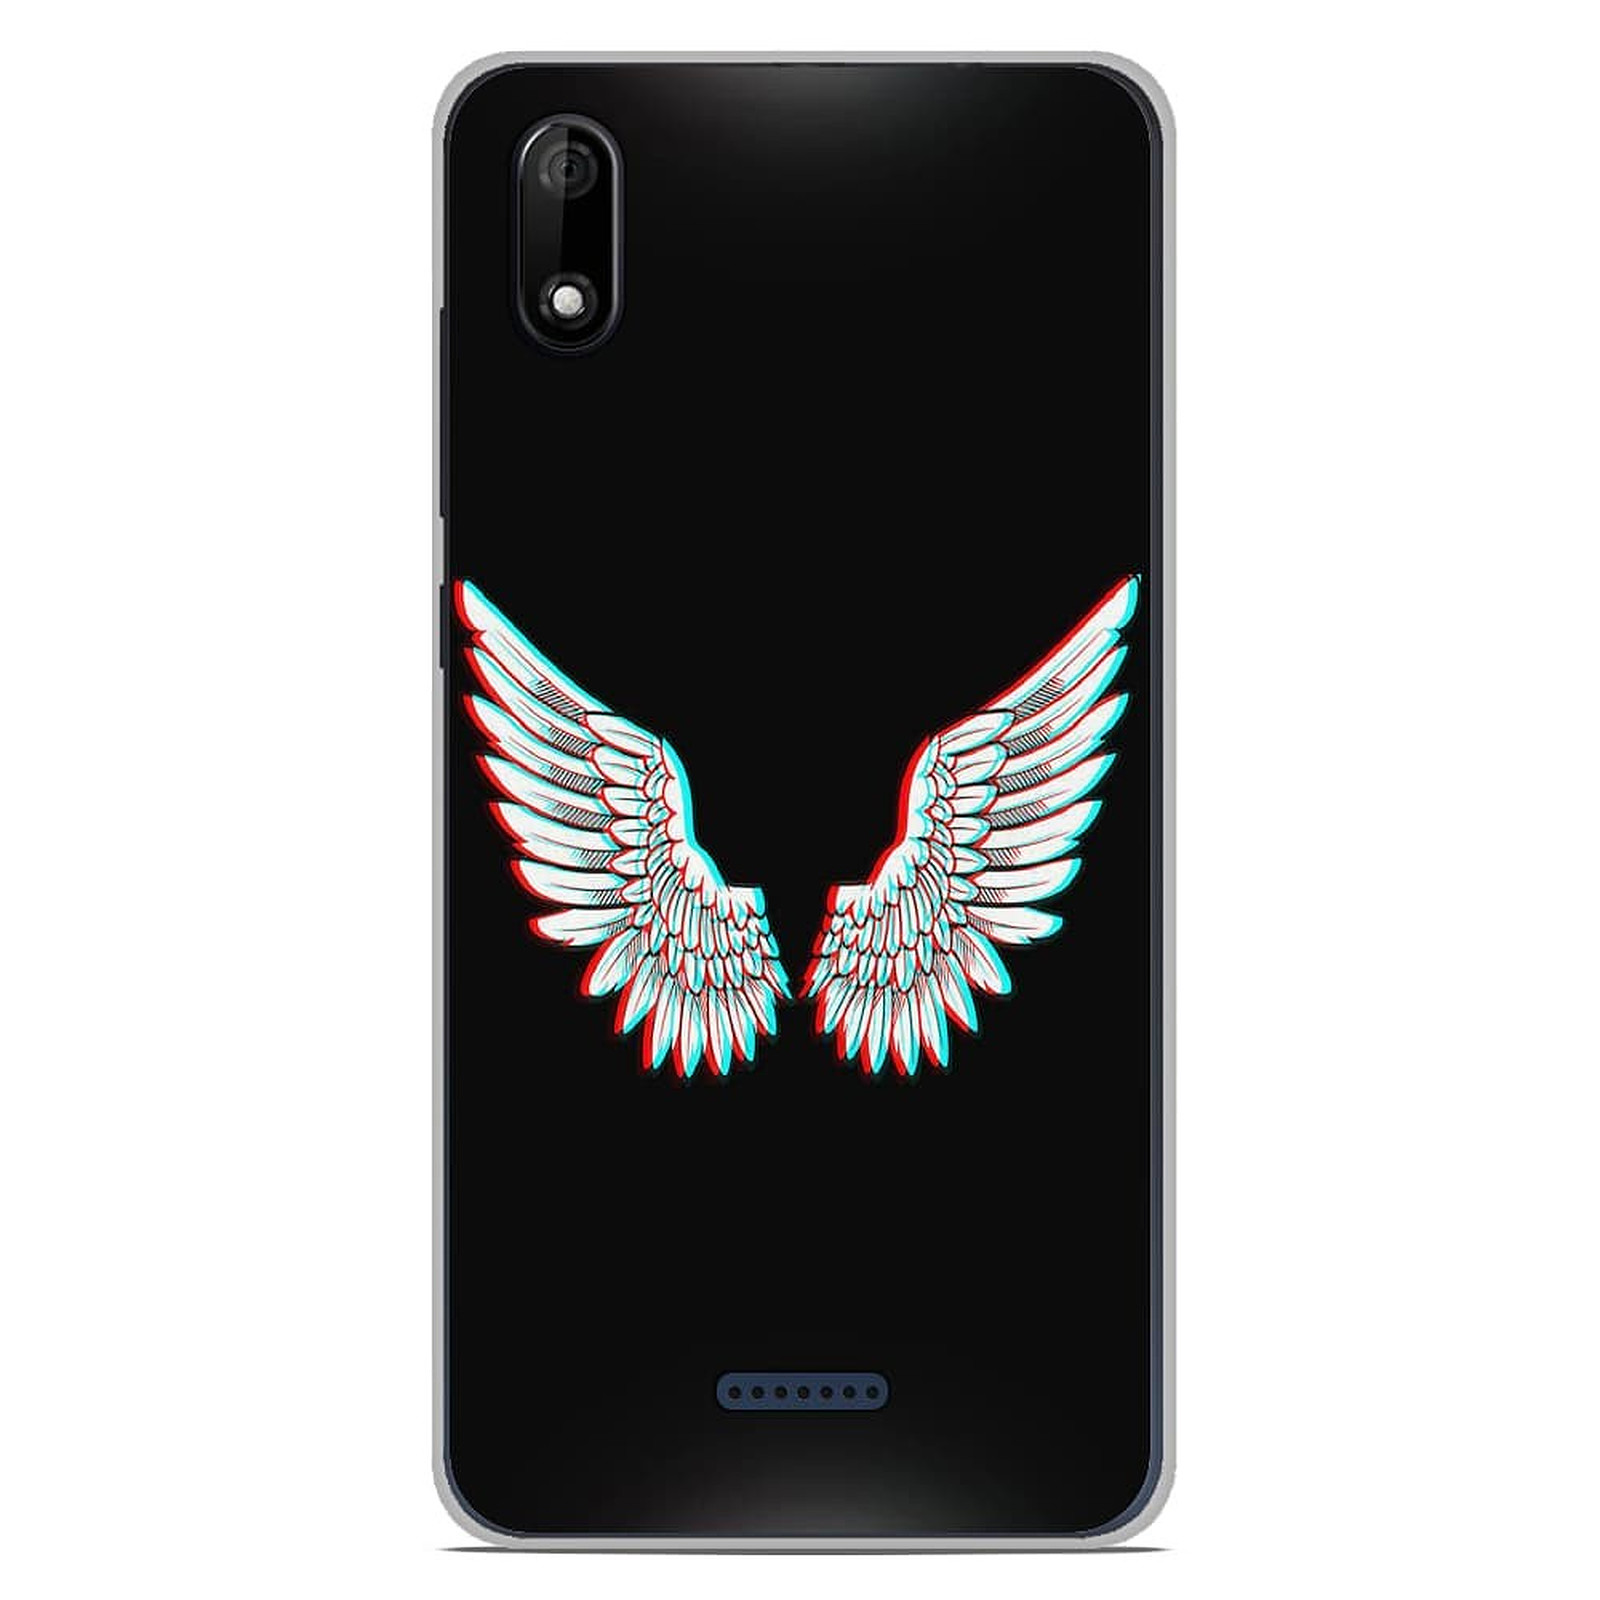 1001 Coques Coque silicone gel Wiko Y80 motif Ailes d'Ange - Coque telephone 1001Coques